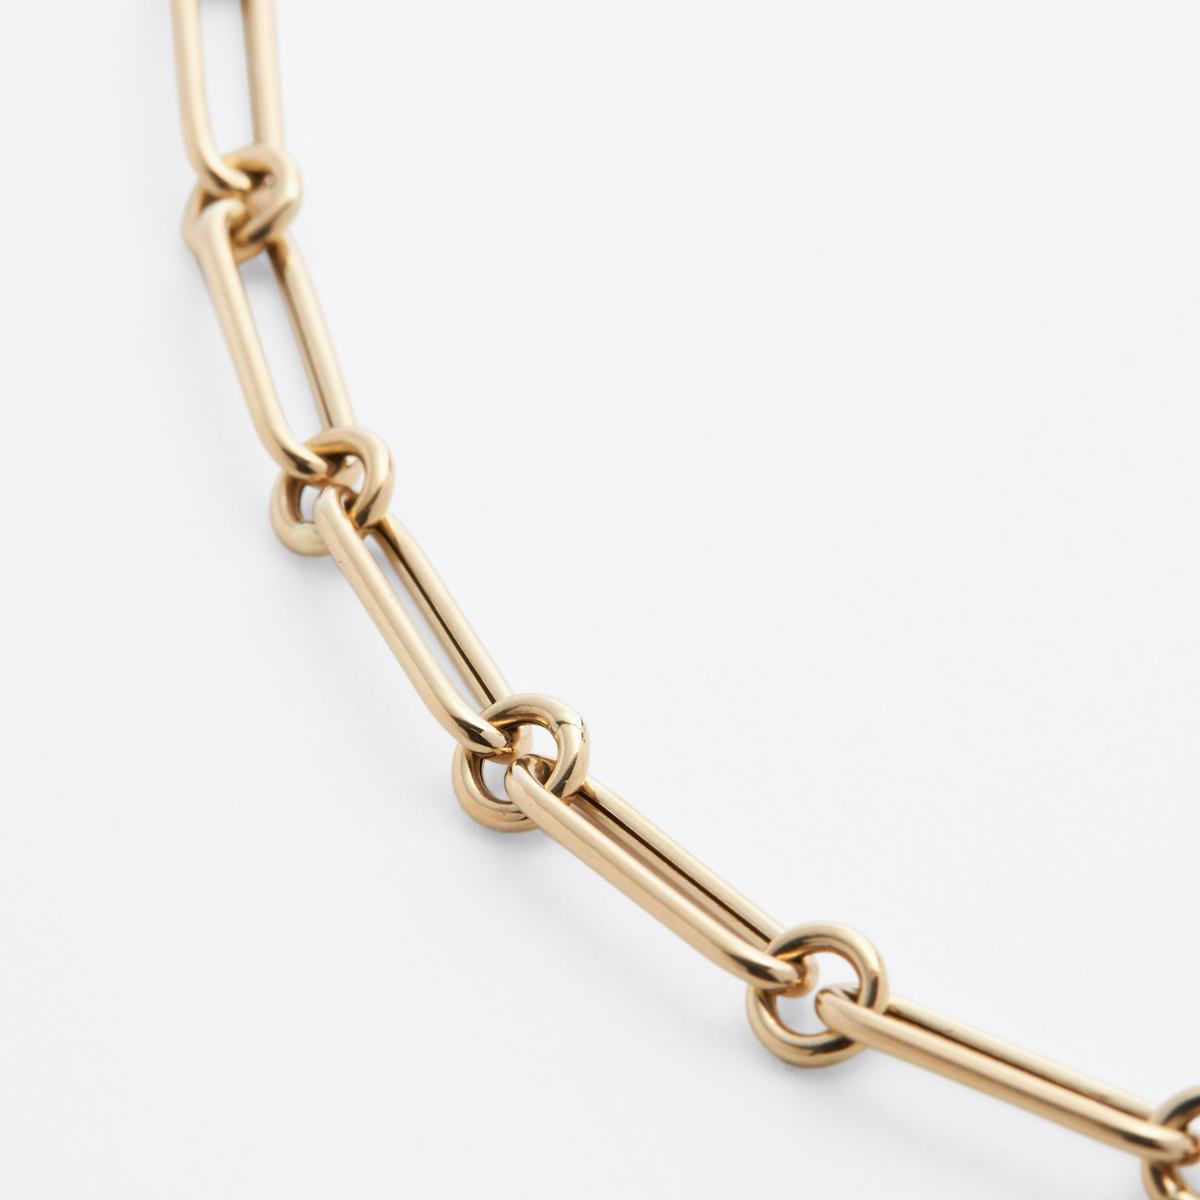 ChainLinkNecklace_Gold_OneSize_Womens_Product_1x1_2795.jpg